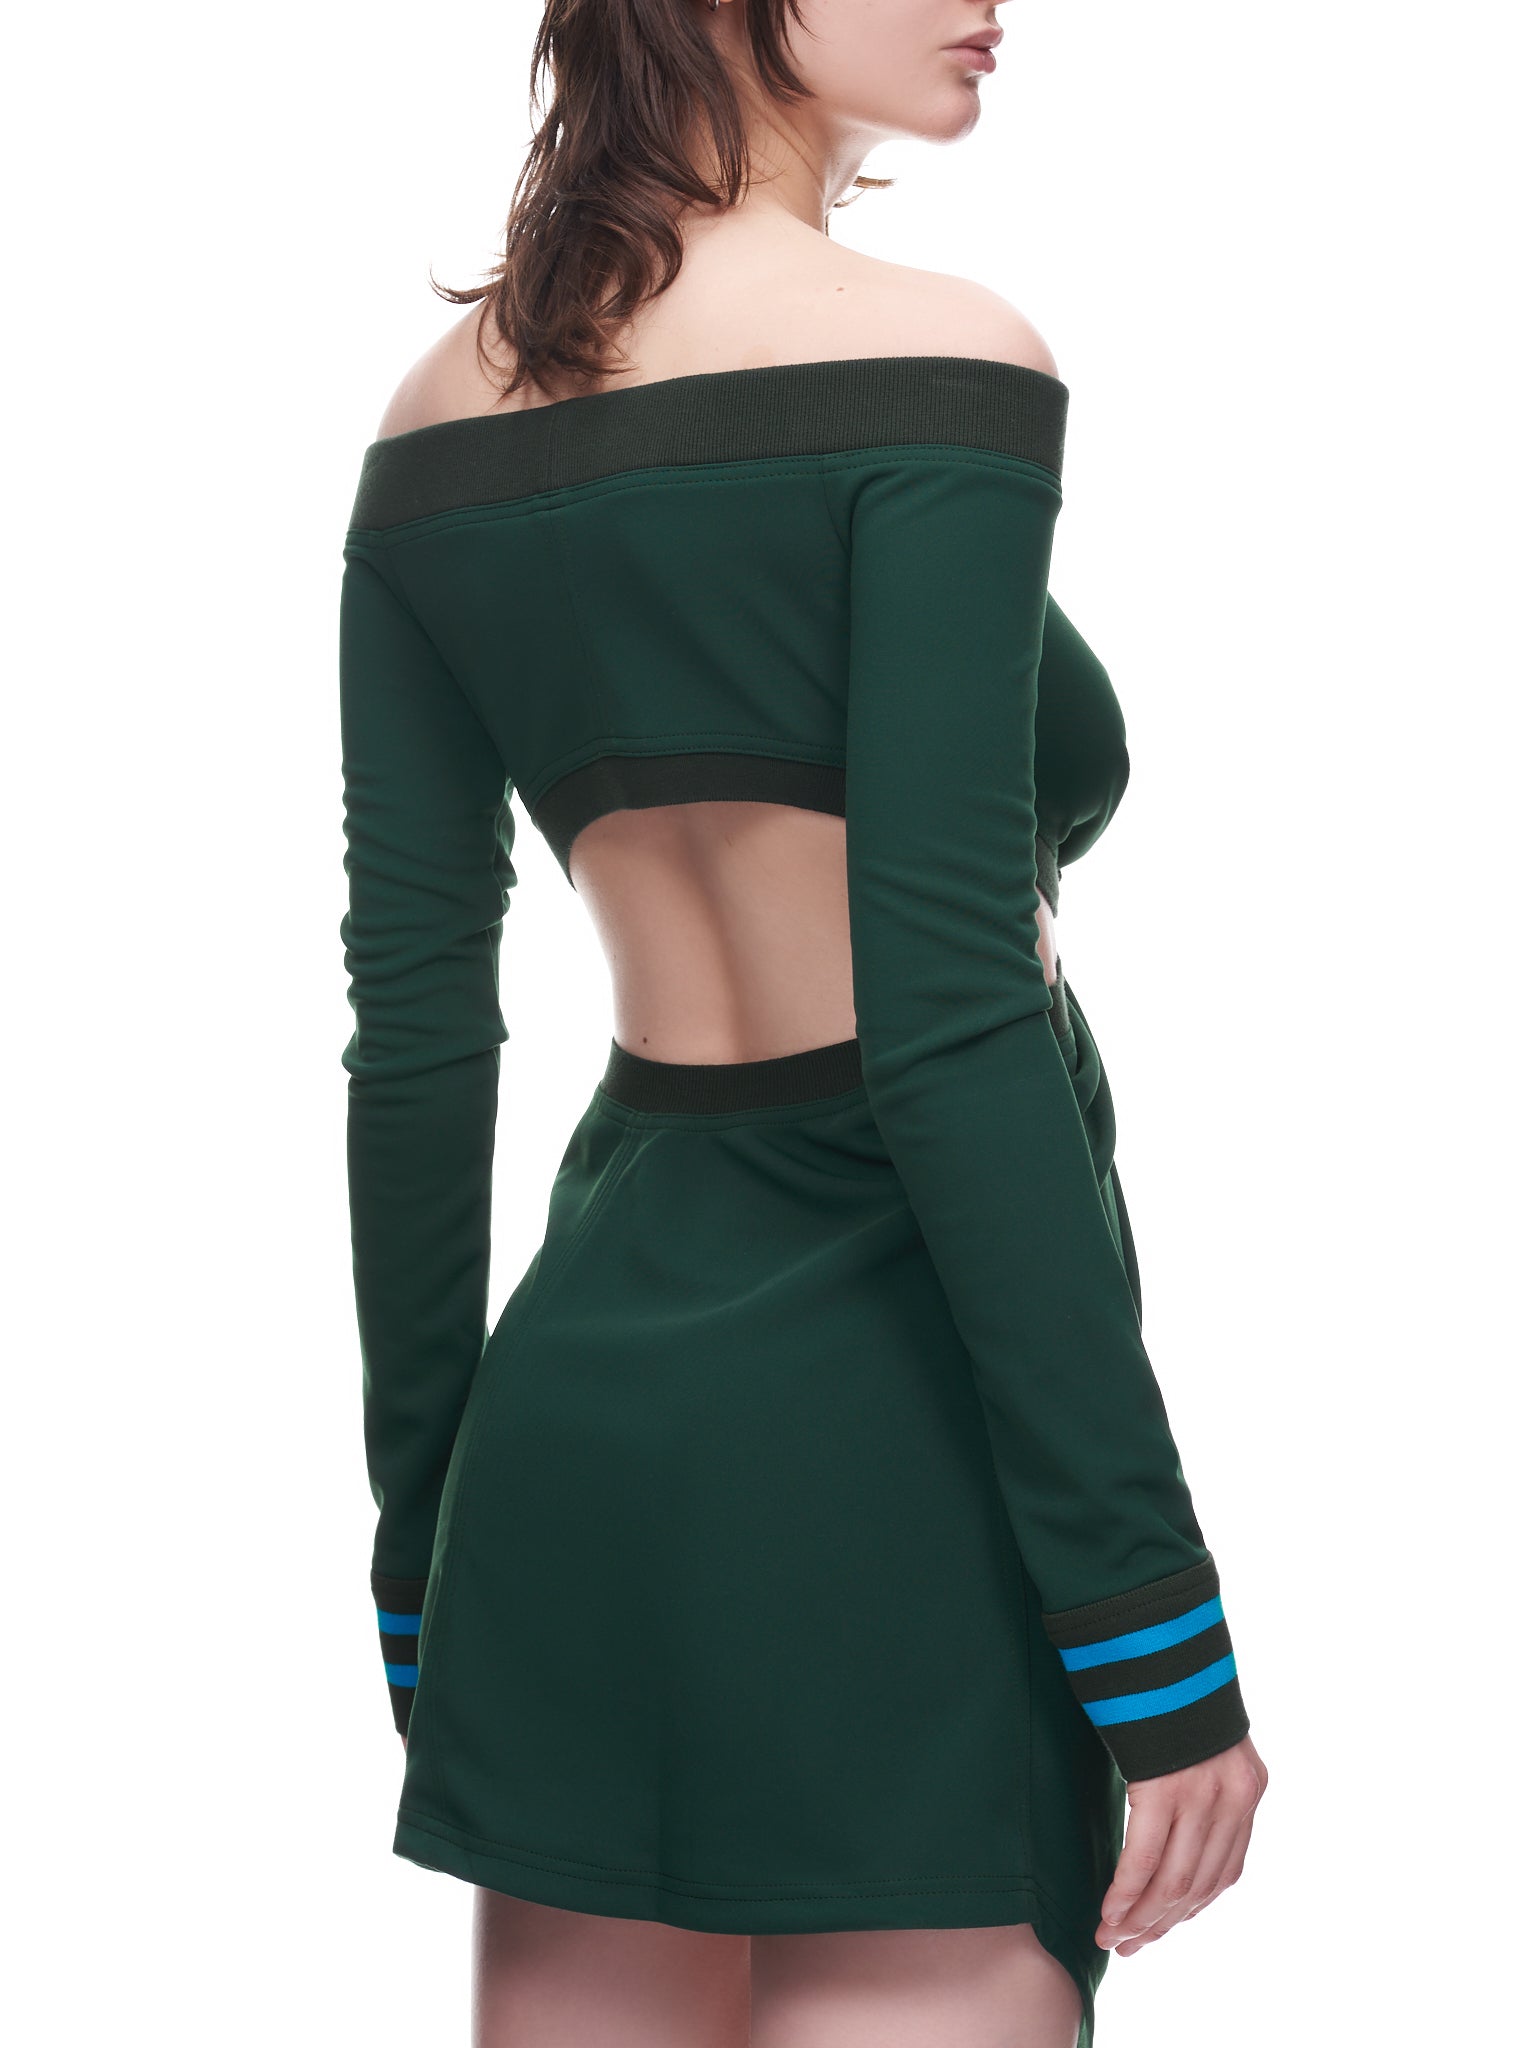 Twisted Mini Dress (DR0313-PG1017-560-FOREST-GREEN)